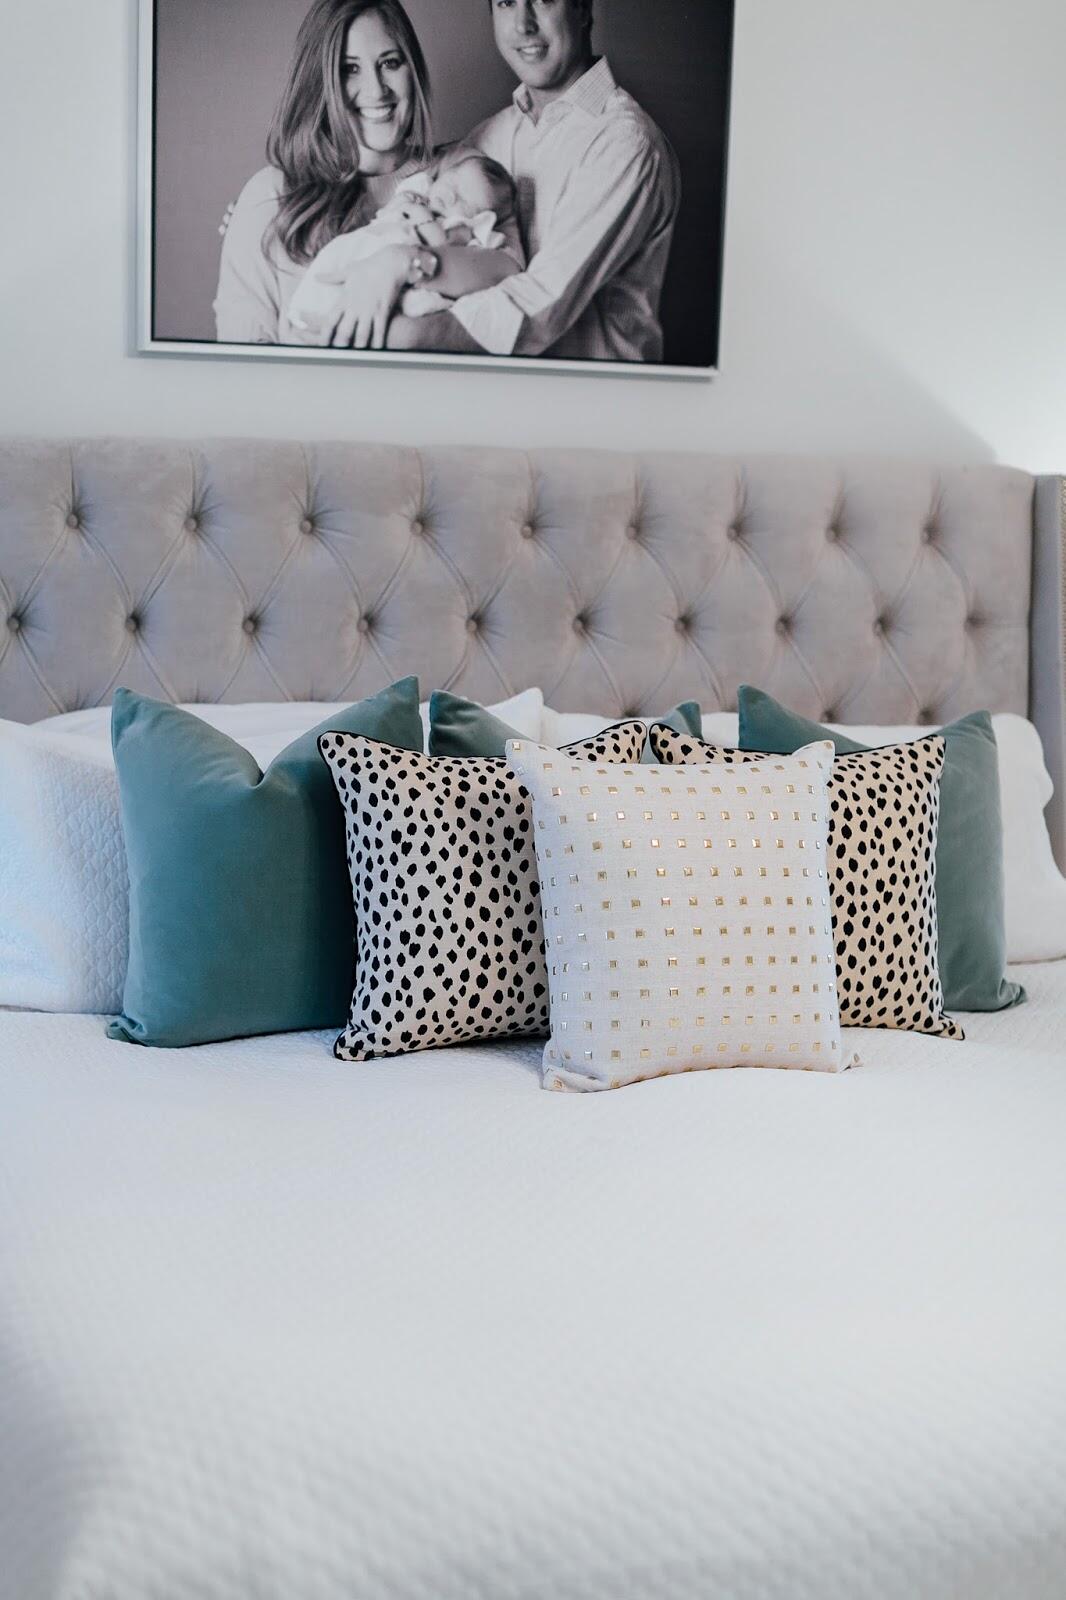 Bedroom Makeover: How to Update Your Bedroom for a Summer Refresh by popular blogger Walking in Memphis in High Heels